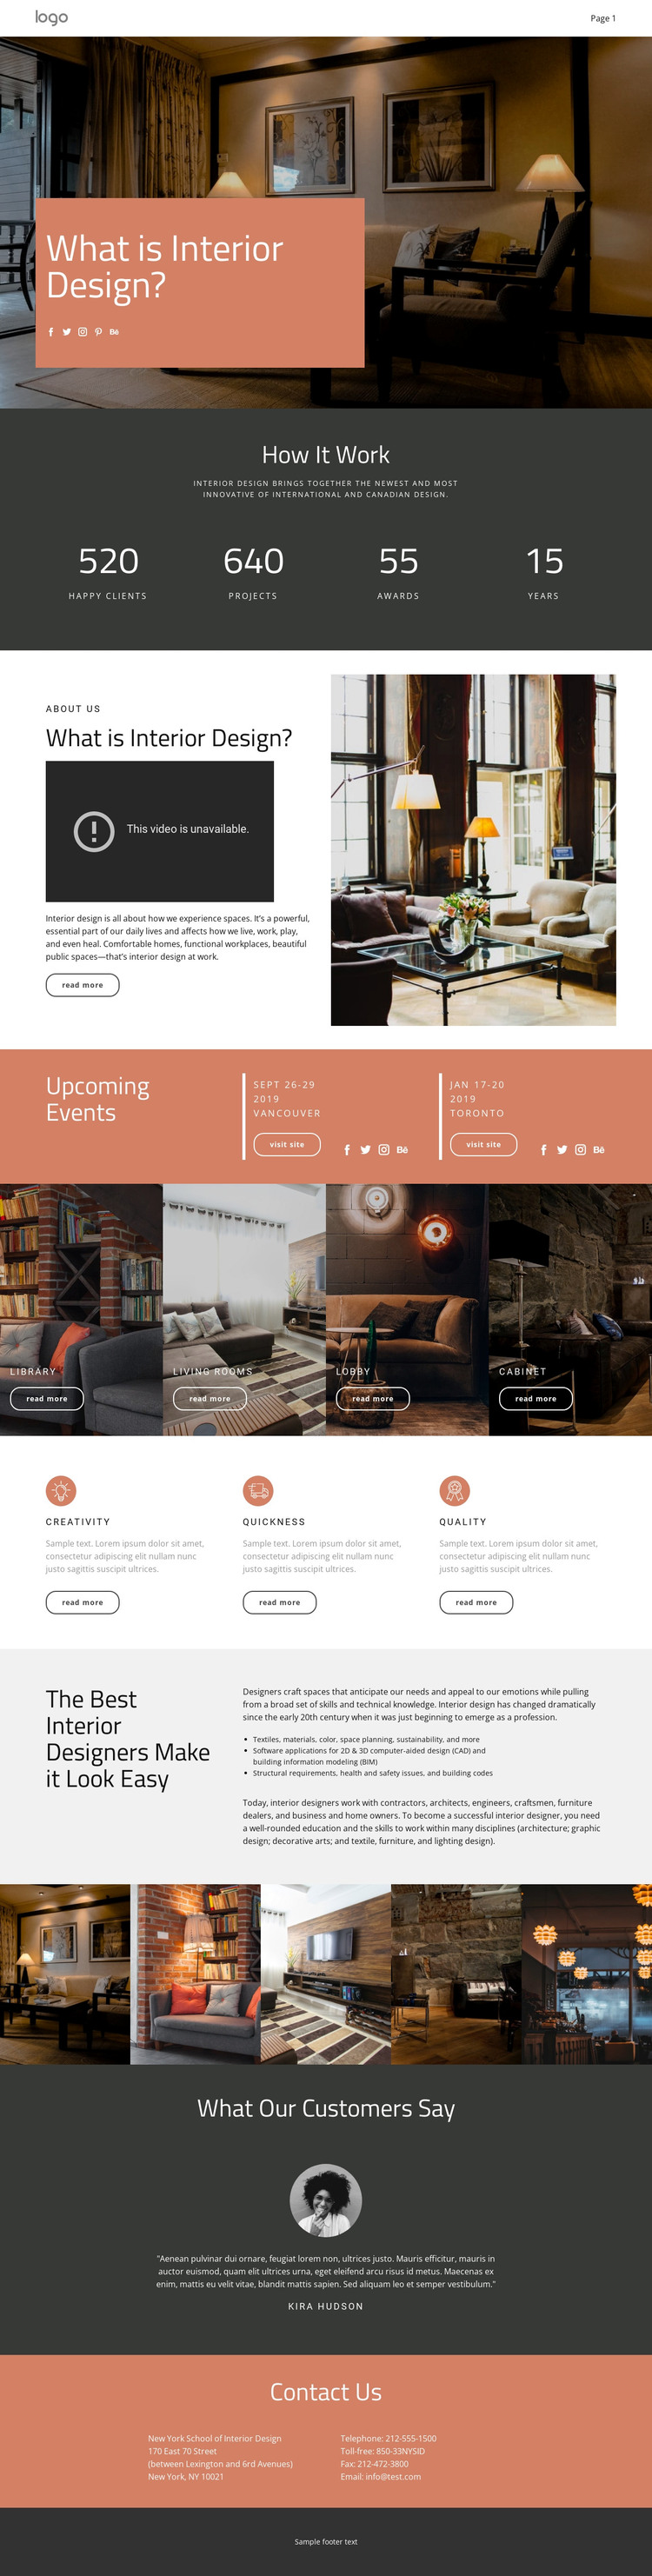 Design of houses and apartments Web Design